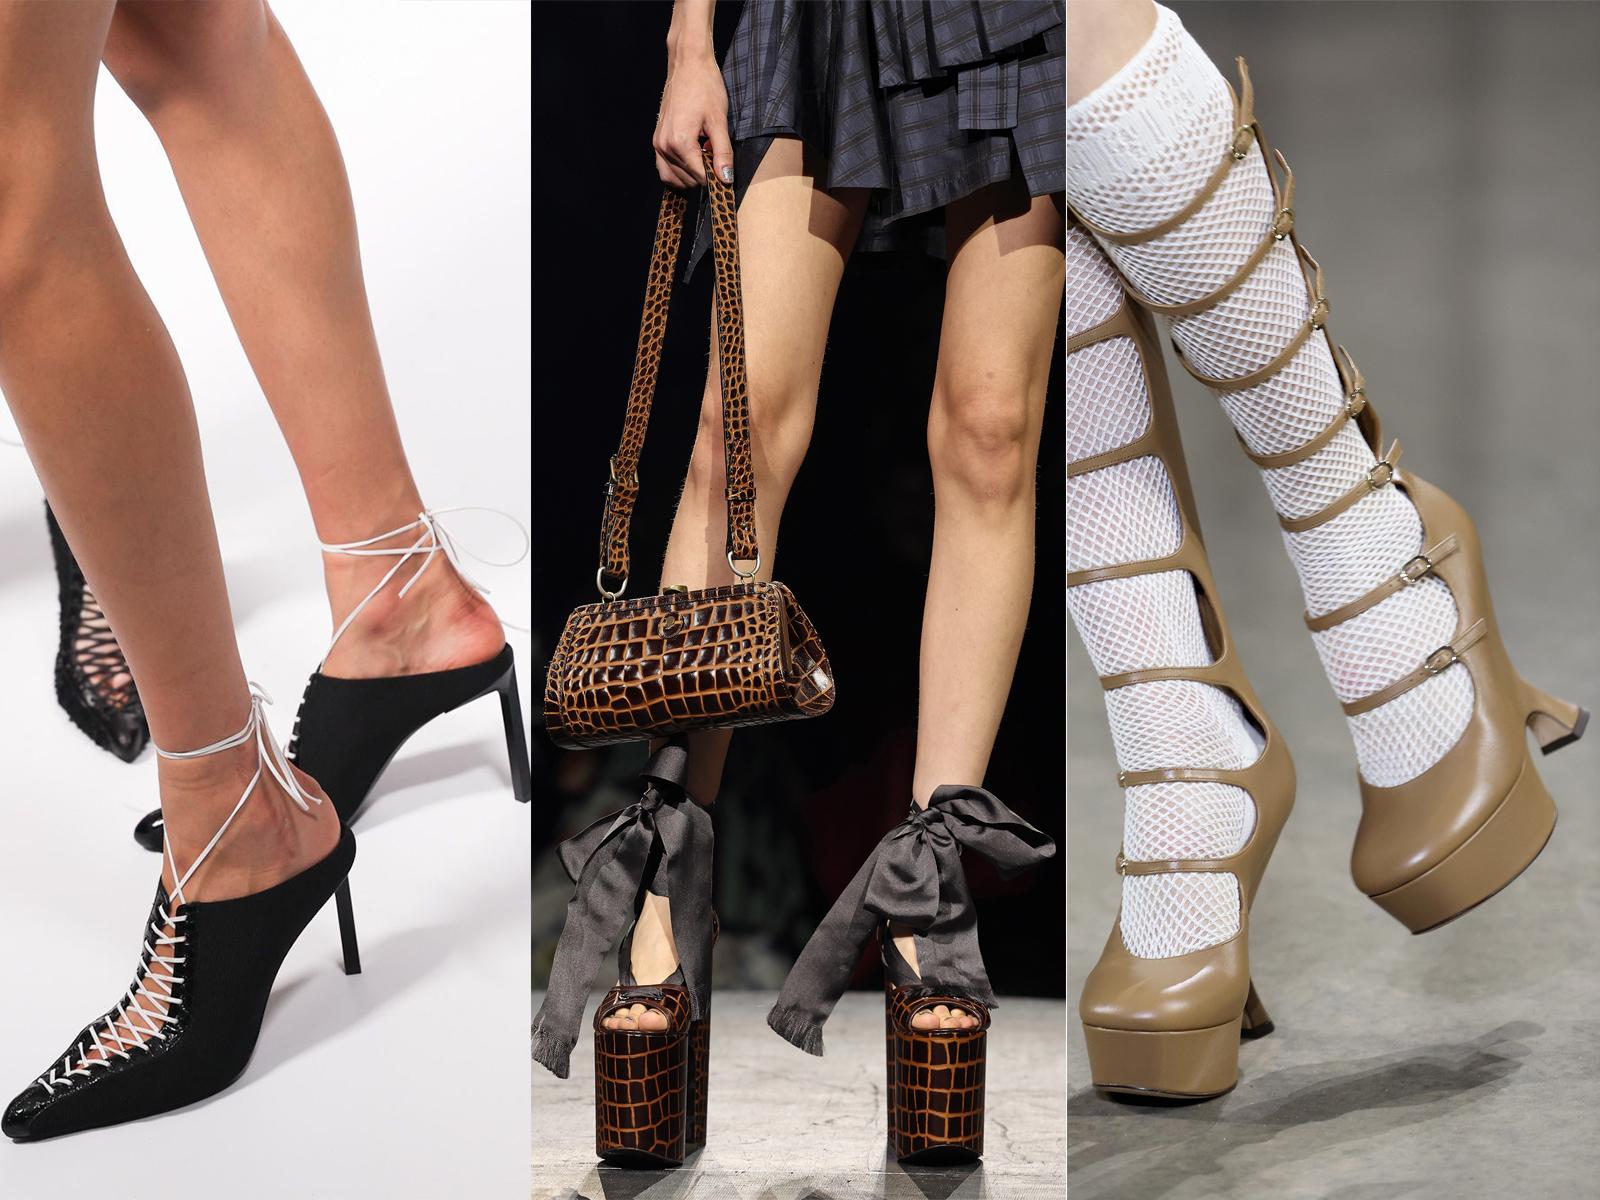 PFW Shoe Trends Inspire Fashion: Platforms, Straps and Socks